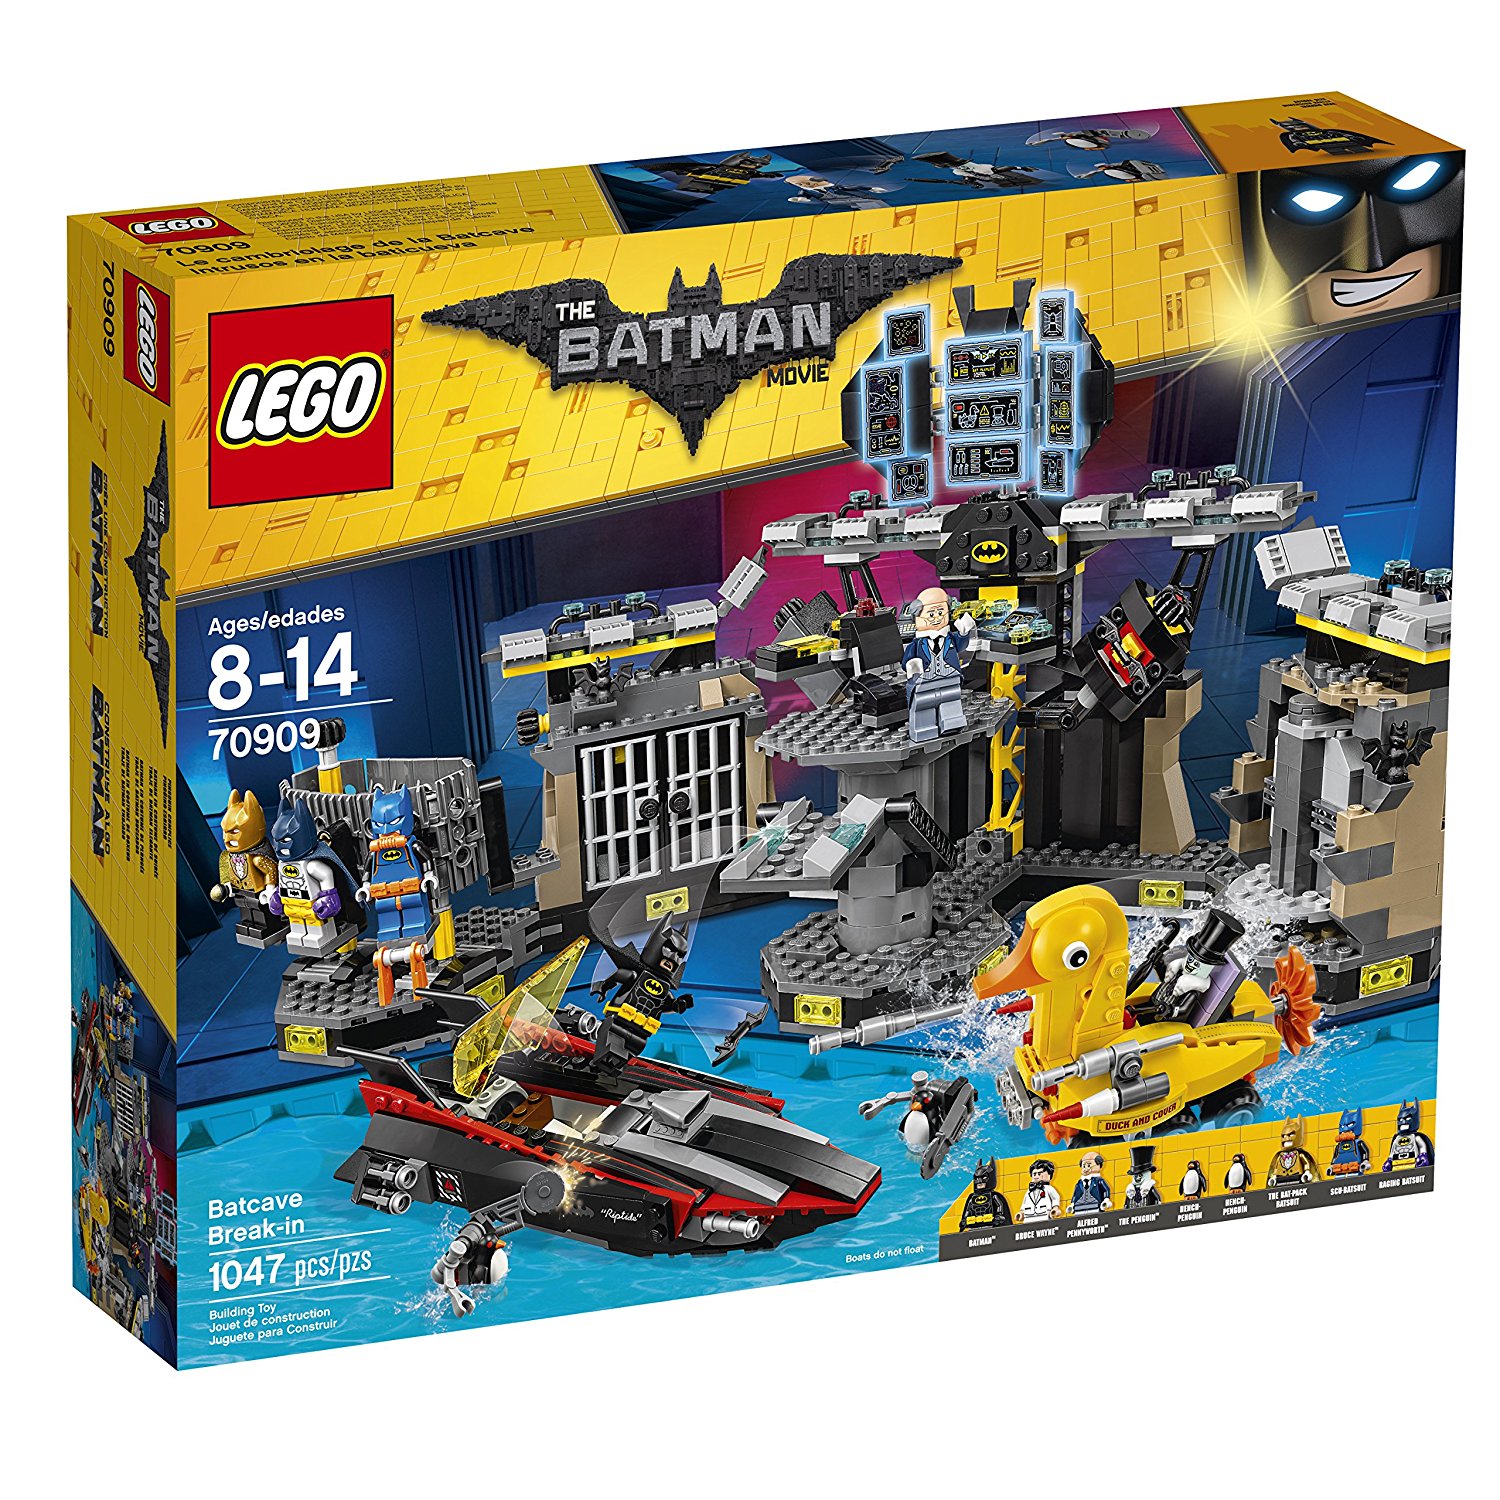 You'll Need Batman's Budget For All the Best Lego Sets Arriving in June